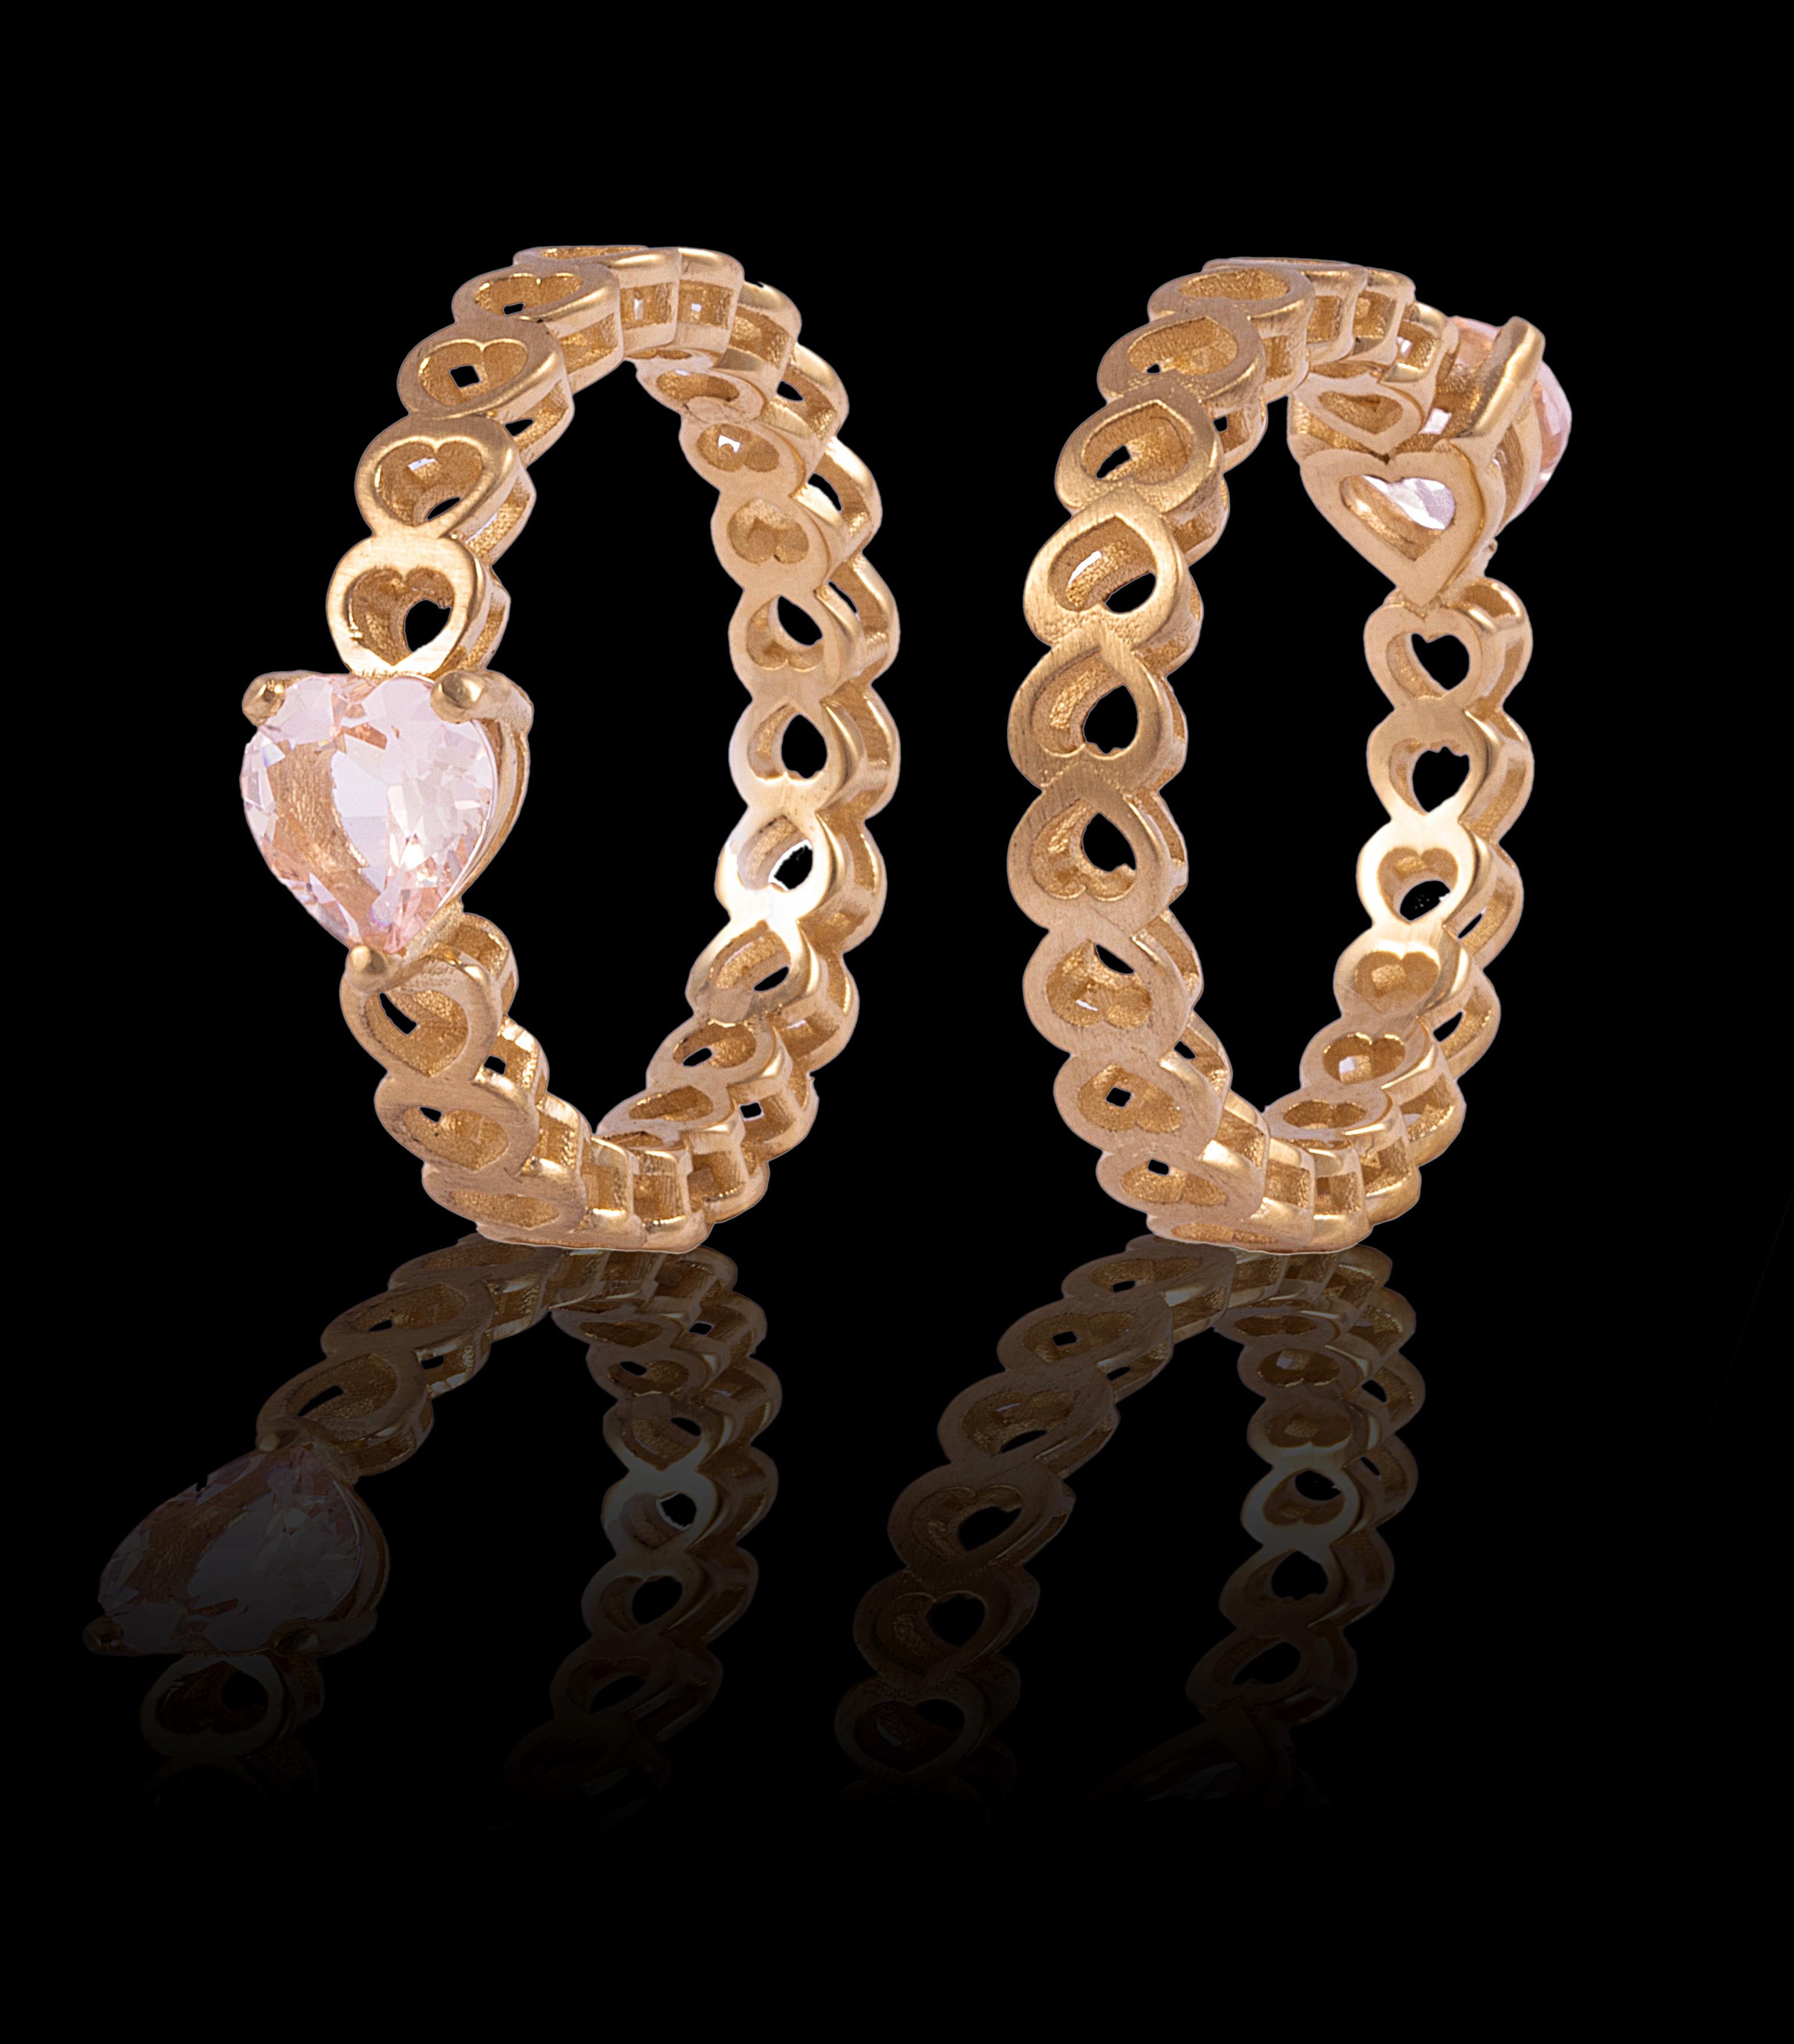 Let the romantic pale pink heart set in satin finished 14k gold adorn you hand. The stone (our largest) is 6mm set in our iconic hearts shank. Available in yellow gold, white gold, and rose gold. Let us know what size you want.
                     